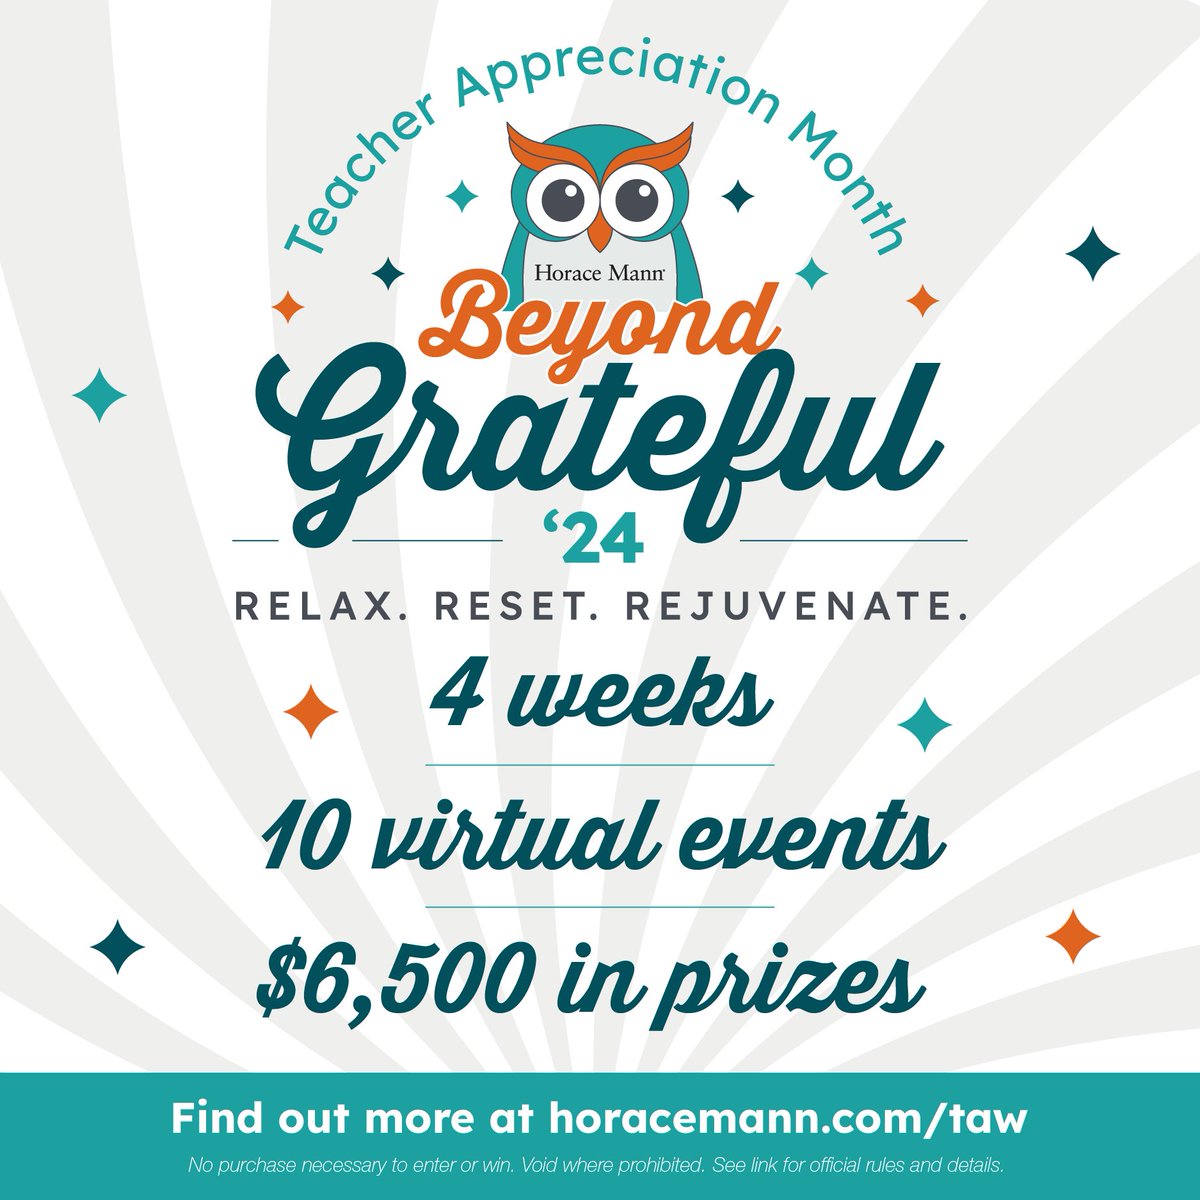 @HoraceMannInsurance has turned #TeacherAppreciationWeek into a month-long celebration for anyone in education! They’re hosting free virtual events and four weeks of prizes like a Ninja CREAMI, a KitchenAid mixer and tons of gift cards! More here: bit.ly/44goZVC